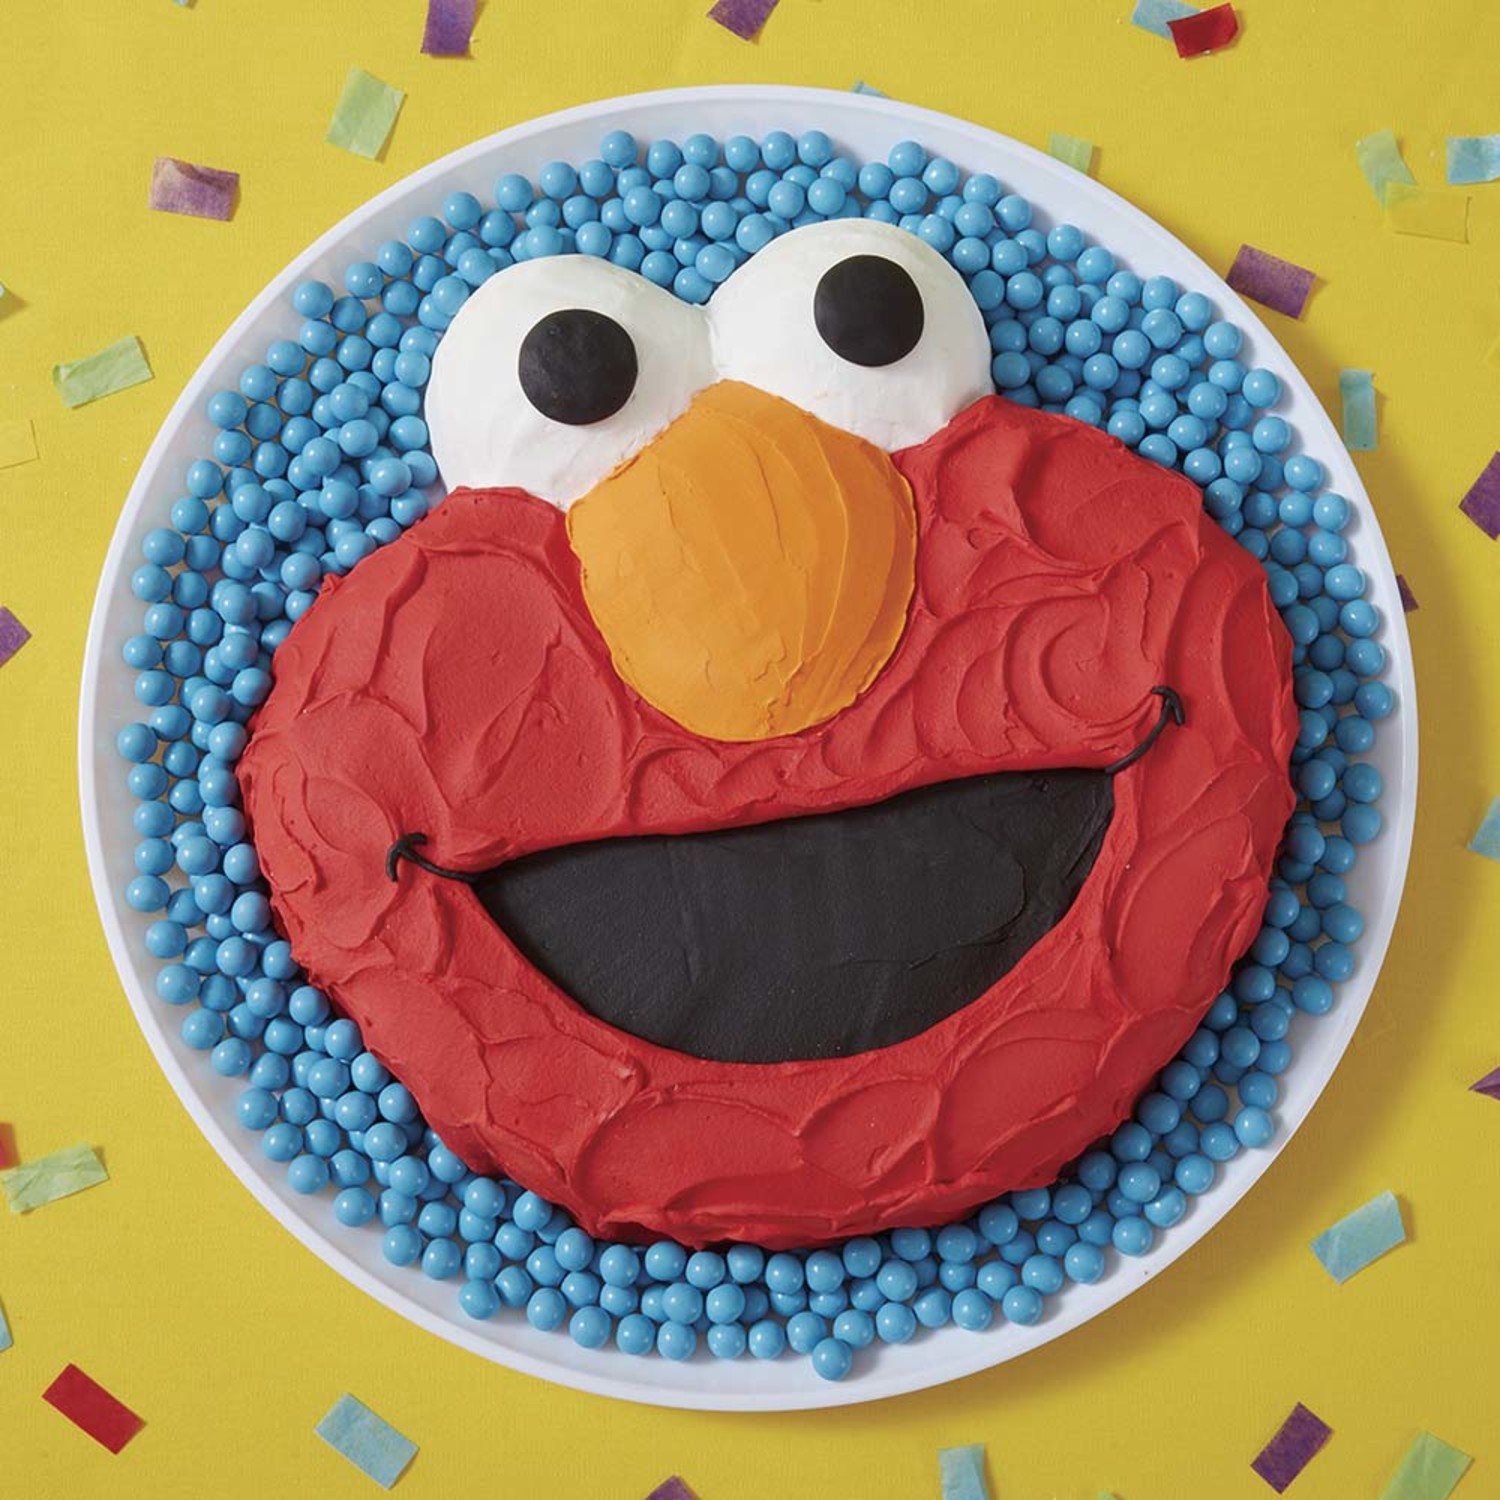 Coolest Elmo Birthday Cakes and Decorating Tips